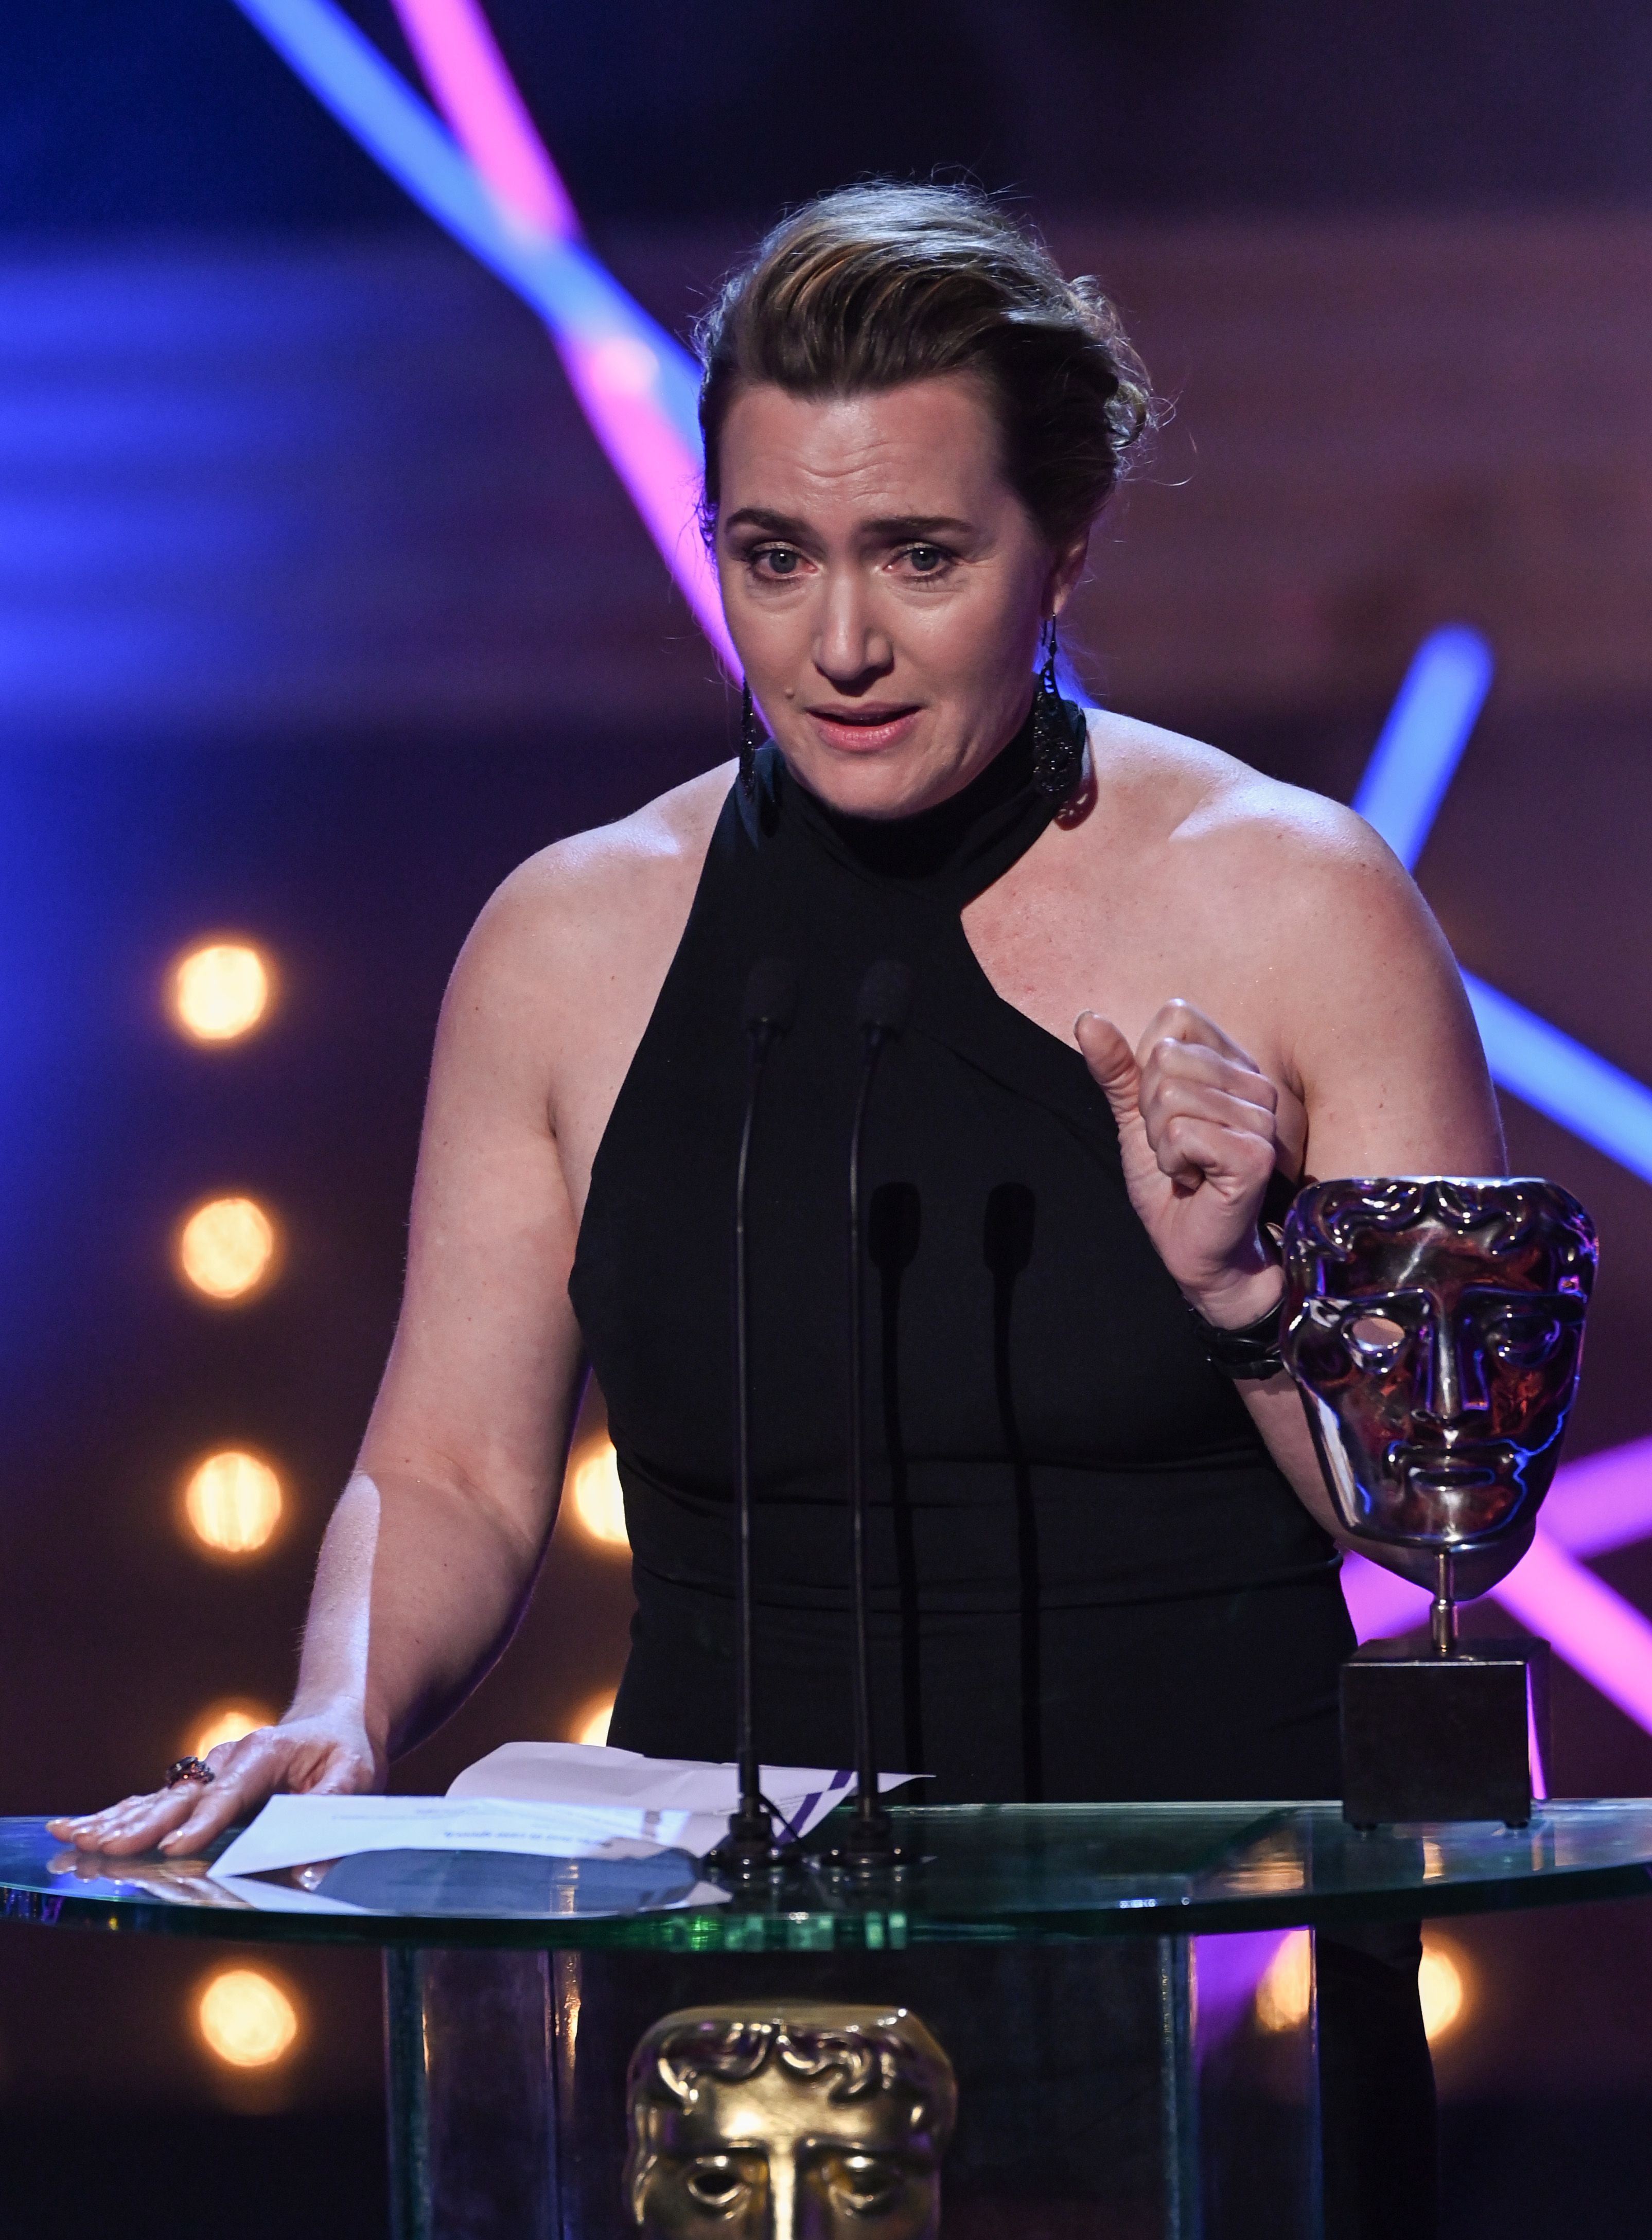 Kate Winslet accepting an award